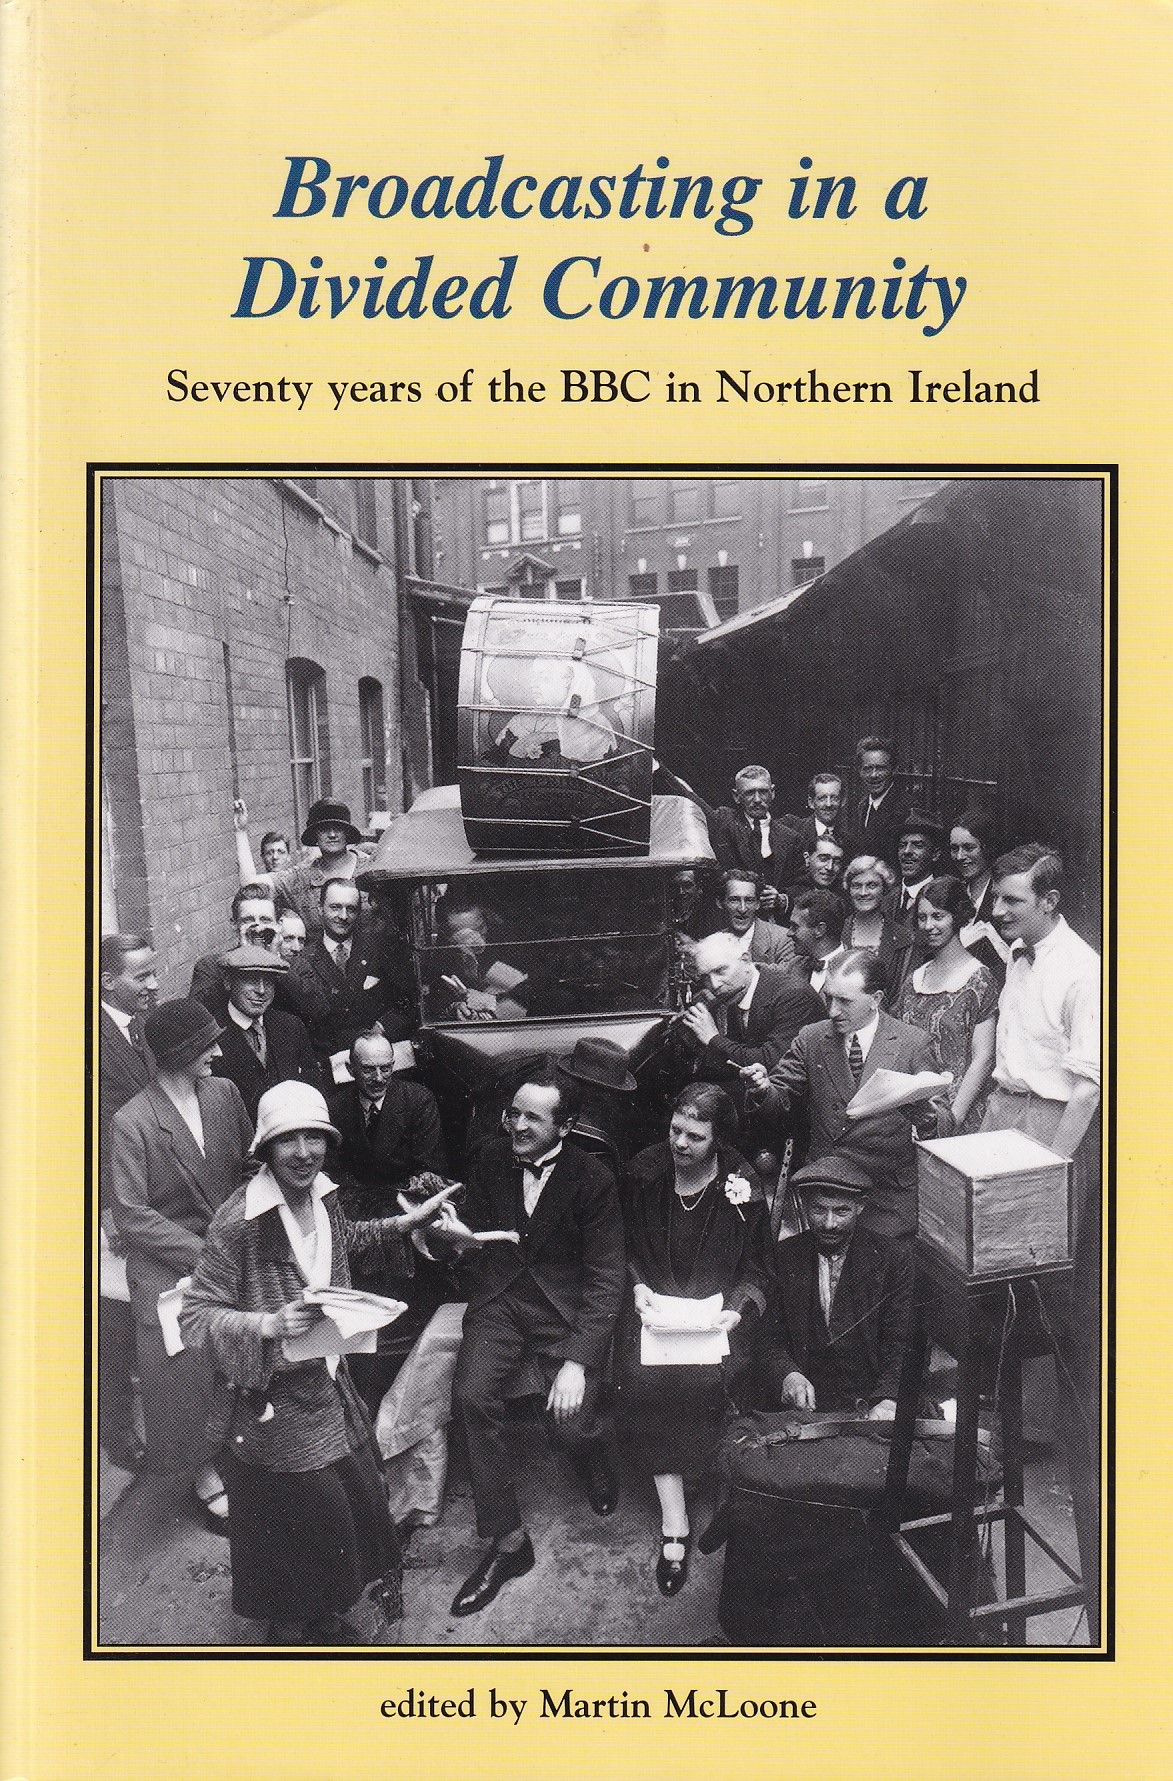 Broadcasting In A Divided Community: Seventy Years of the BBC In Northern Ireland | Martin McLoone (ed.) | Charlie Byrne's